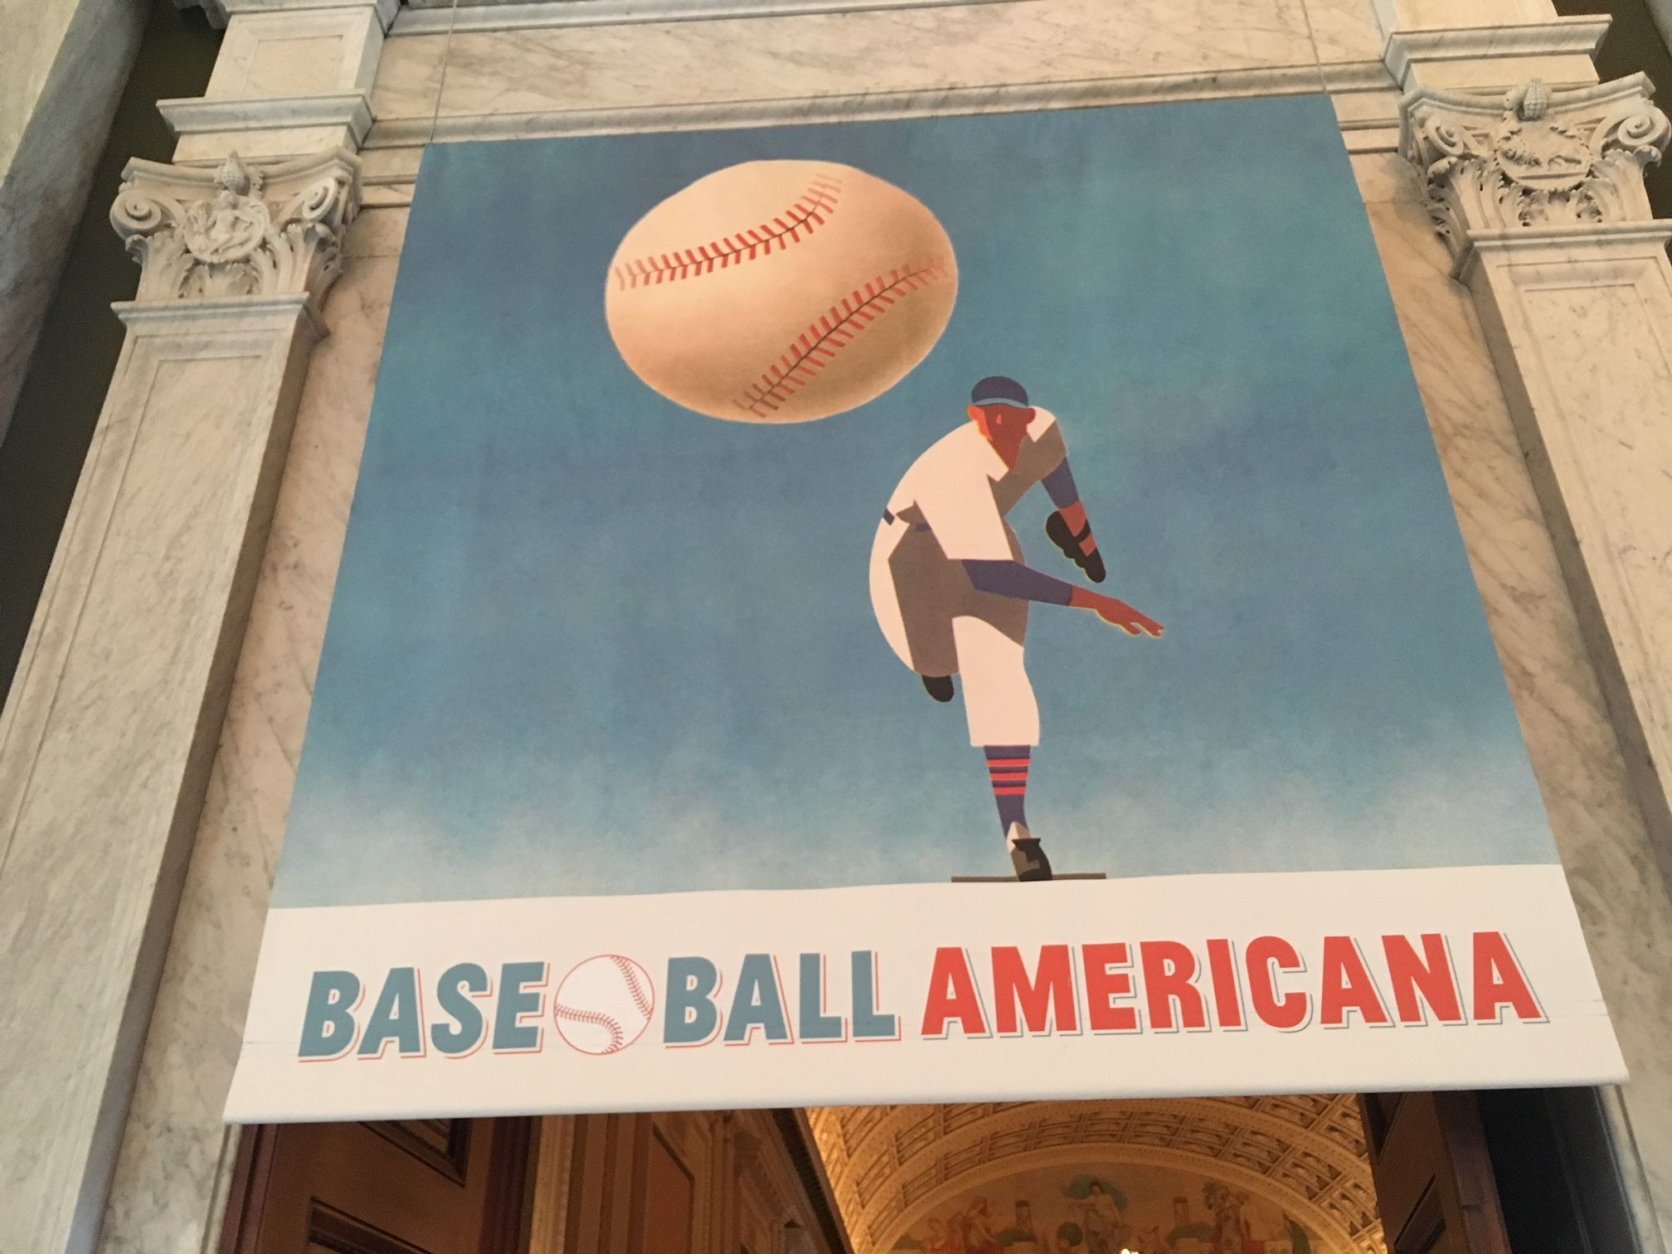 The Library of Congress's "Baseball Americana" exhibition opens Friday, a couple weeks before the MLB All-Star Game comes to Washington. (WTOP/Noah Frank)